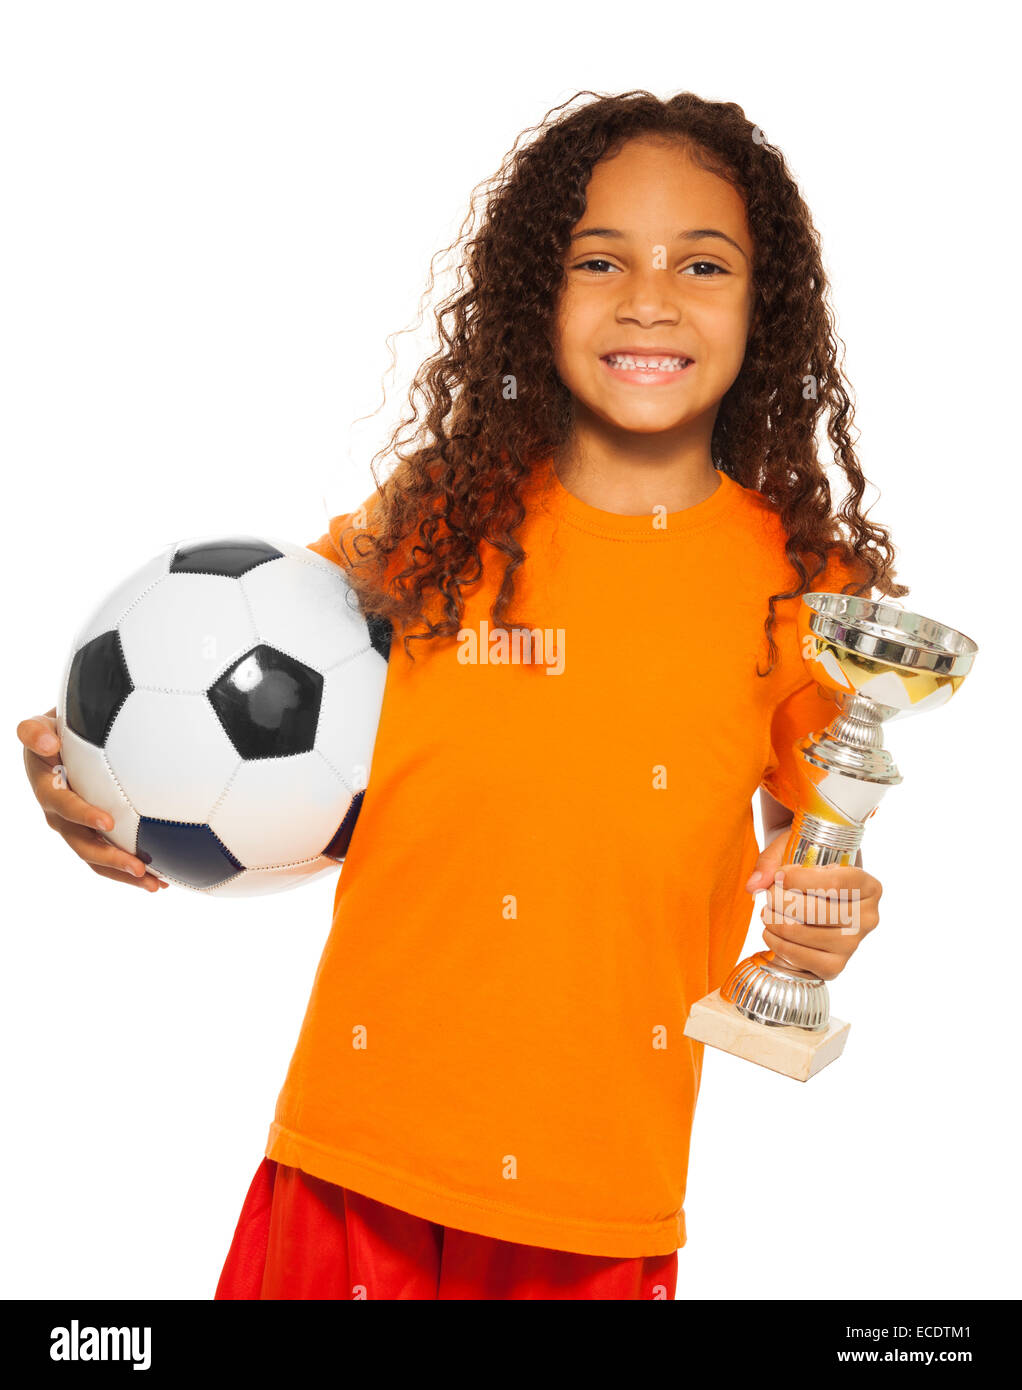 Little black girl holding soccer ball and prize Stock Photo